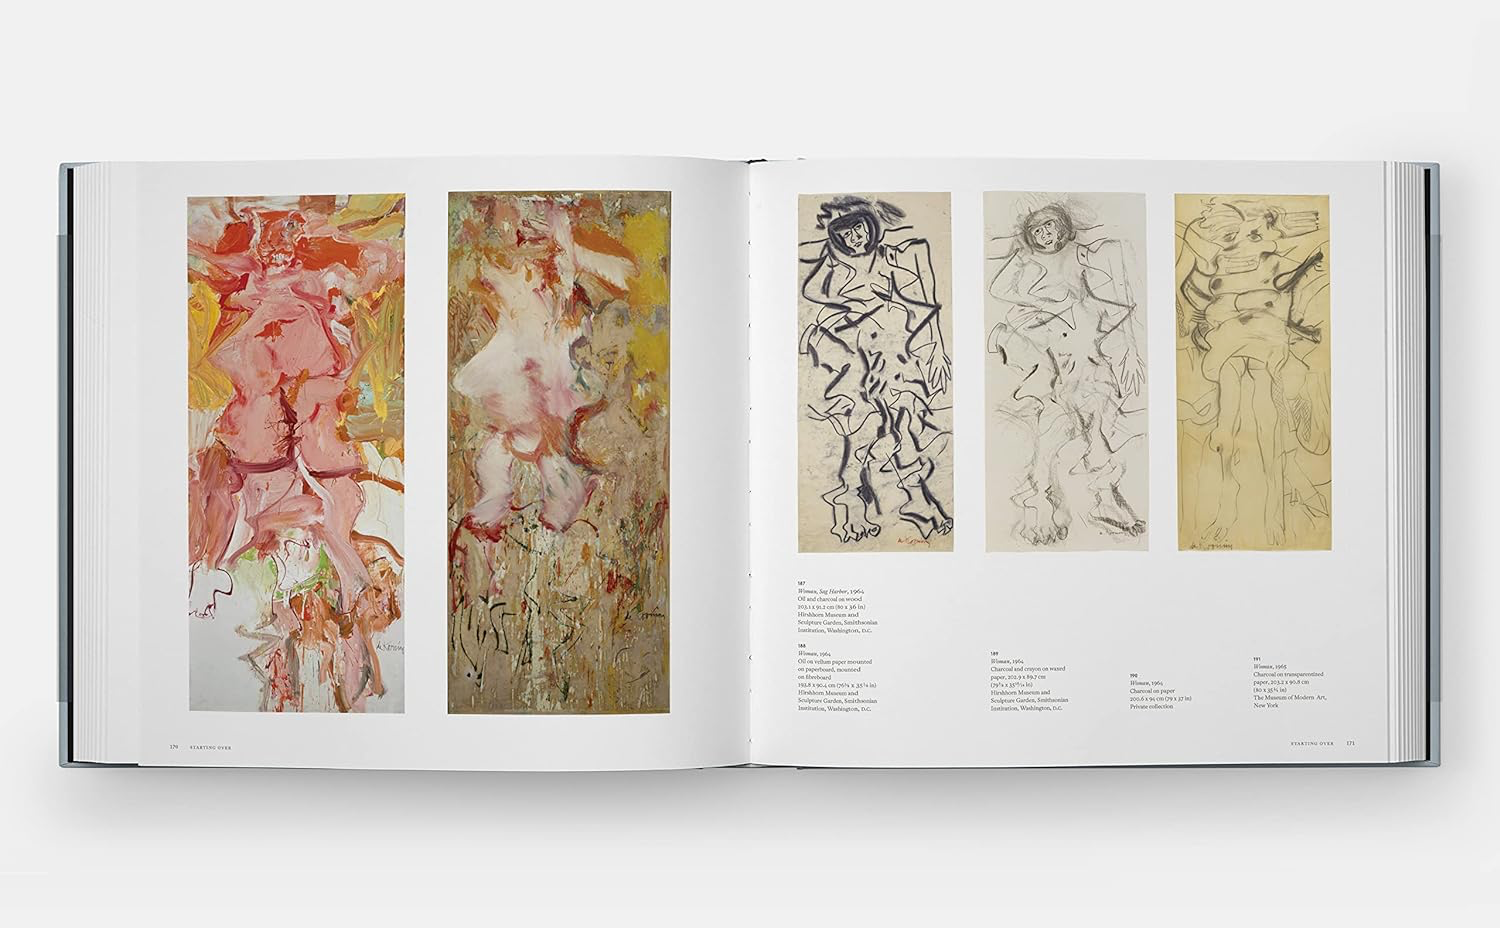 “A Way of Living: The Art of Willem de Kooning” Pages 170 and 171